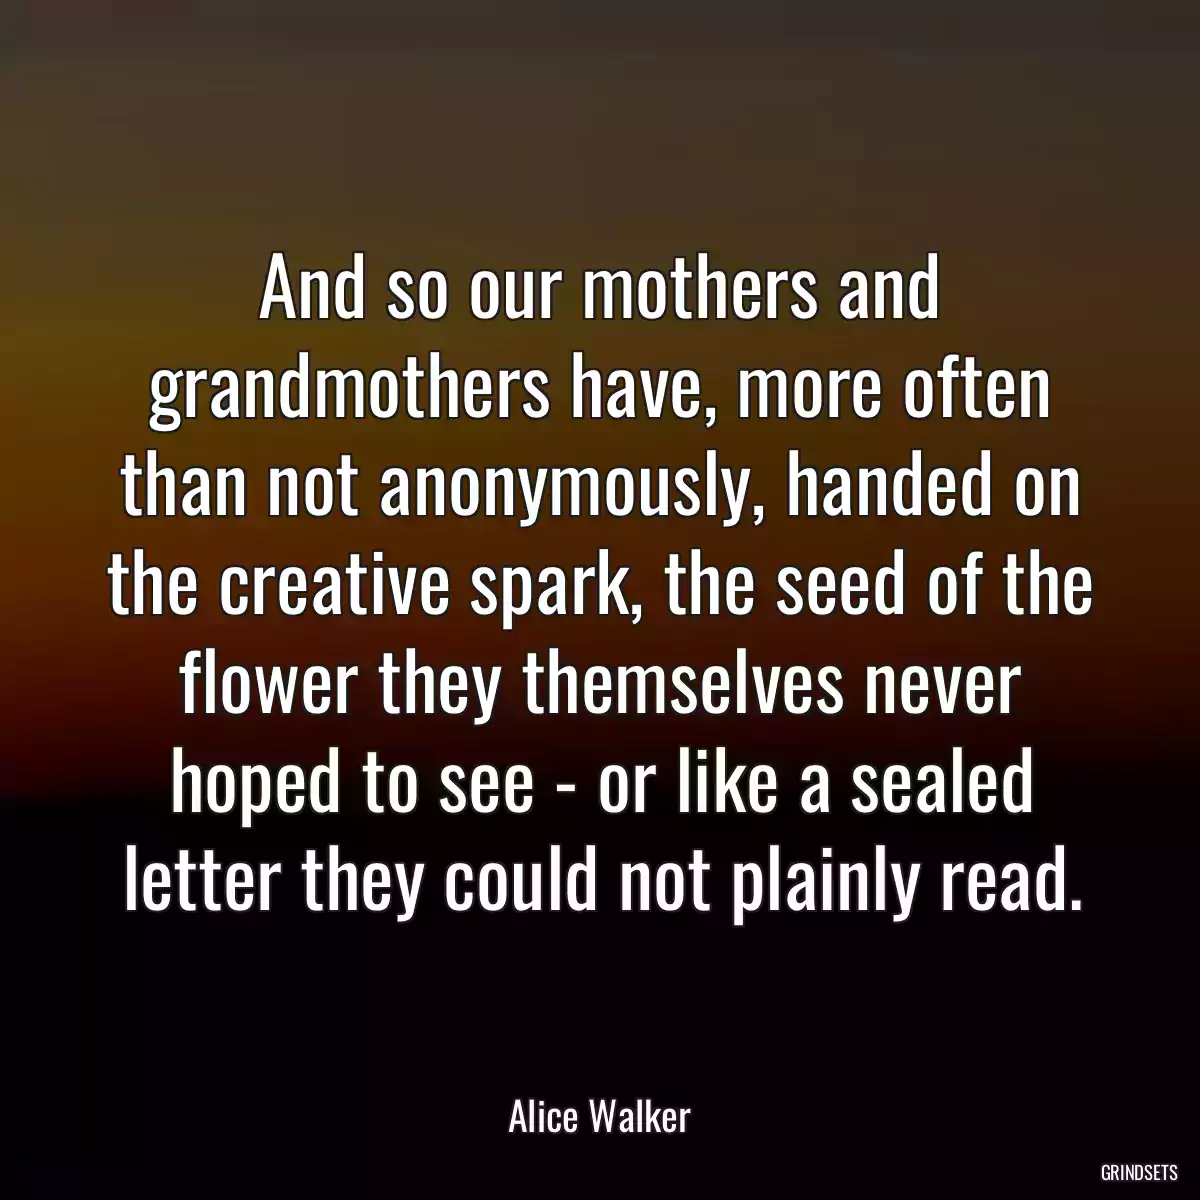 And so our mothers and grandmothers have, more often than not anonymously, handed on the creative spark, the seed of the flower they themselves never hoped to see - or like a sealed letter they could not plainly read.